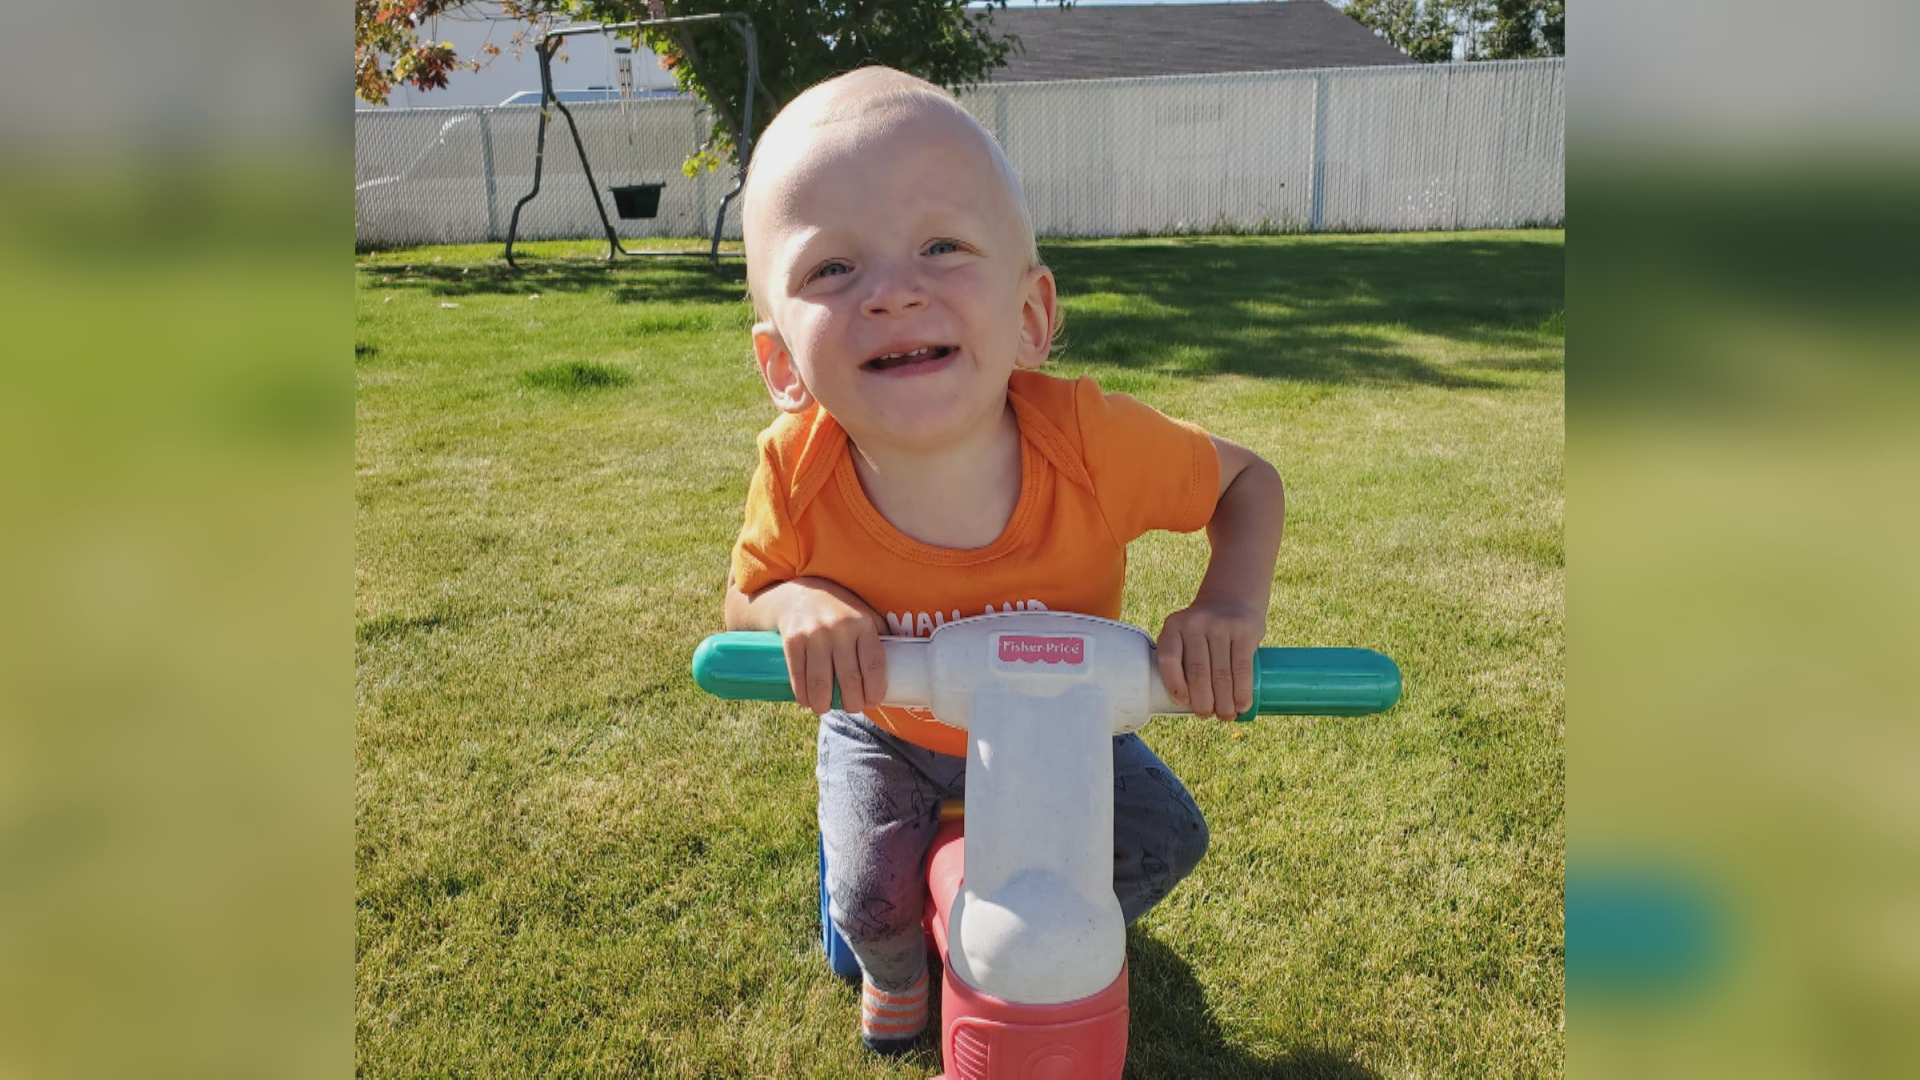 Max Sych's family is pushing to raise millions of dollars to cure his spinal muscular atrophy.